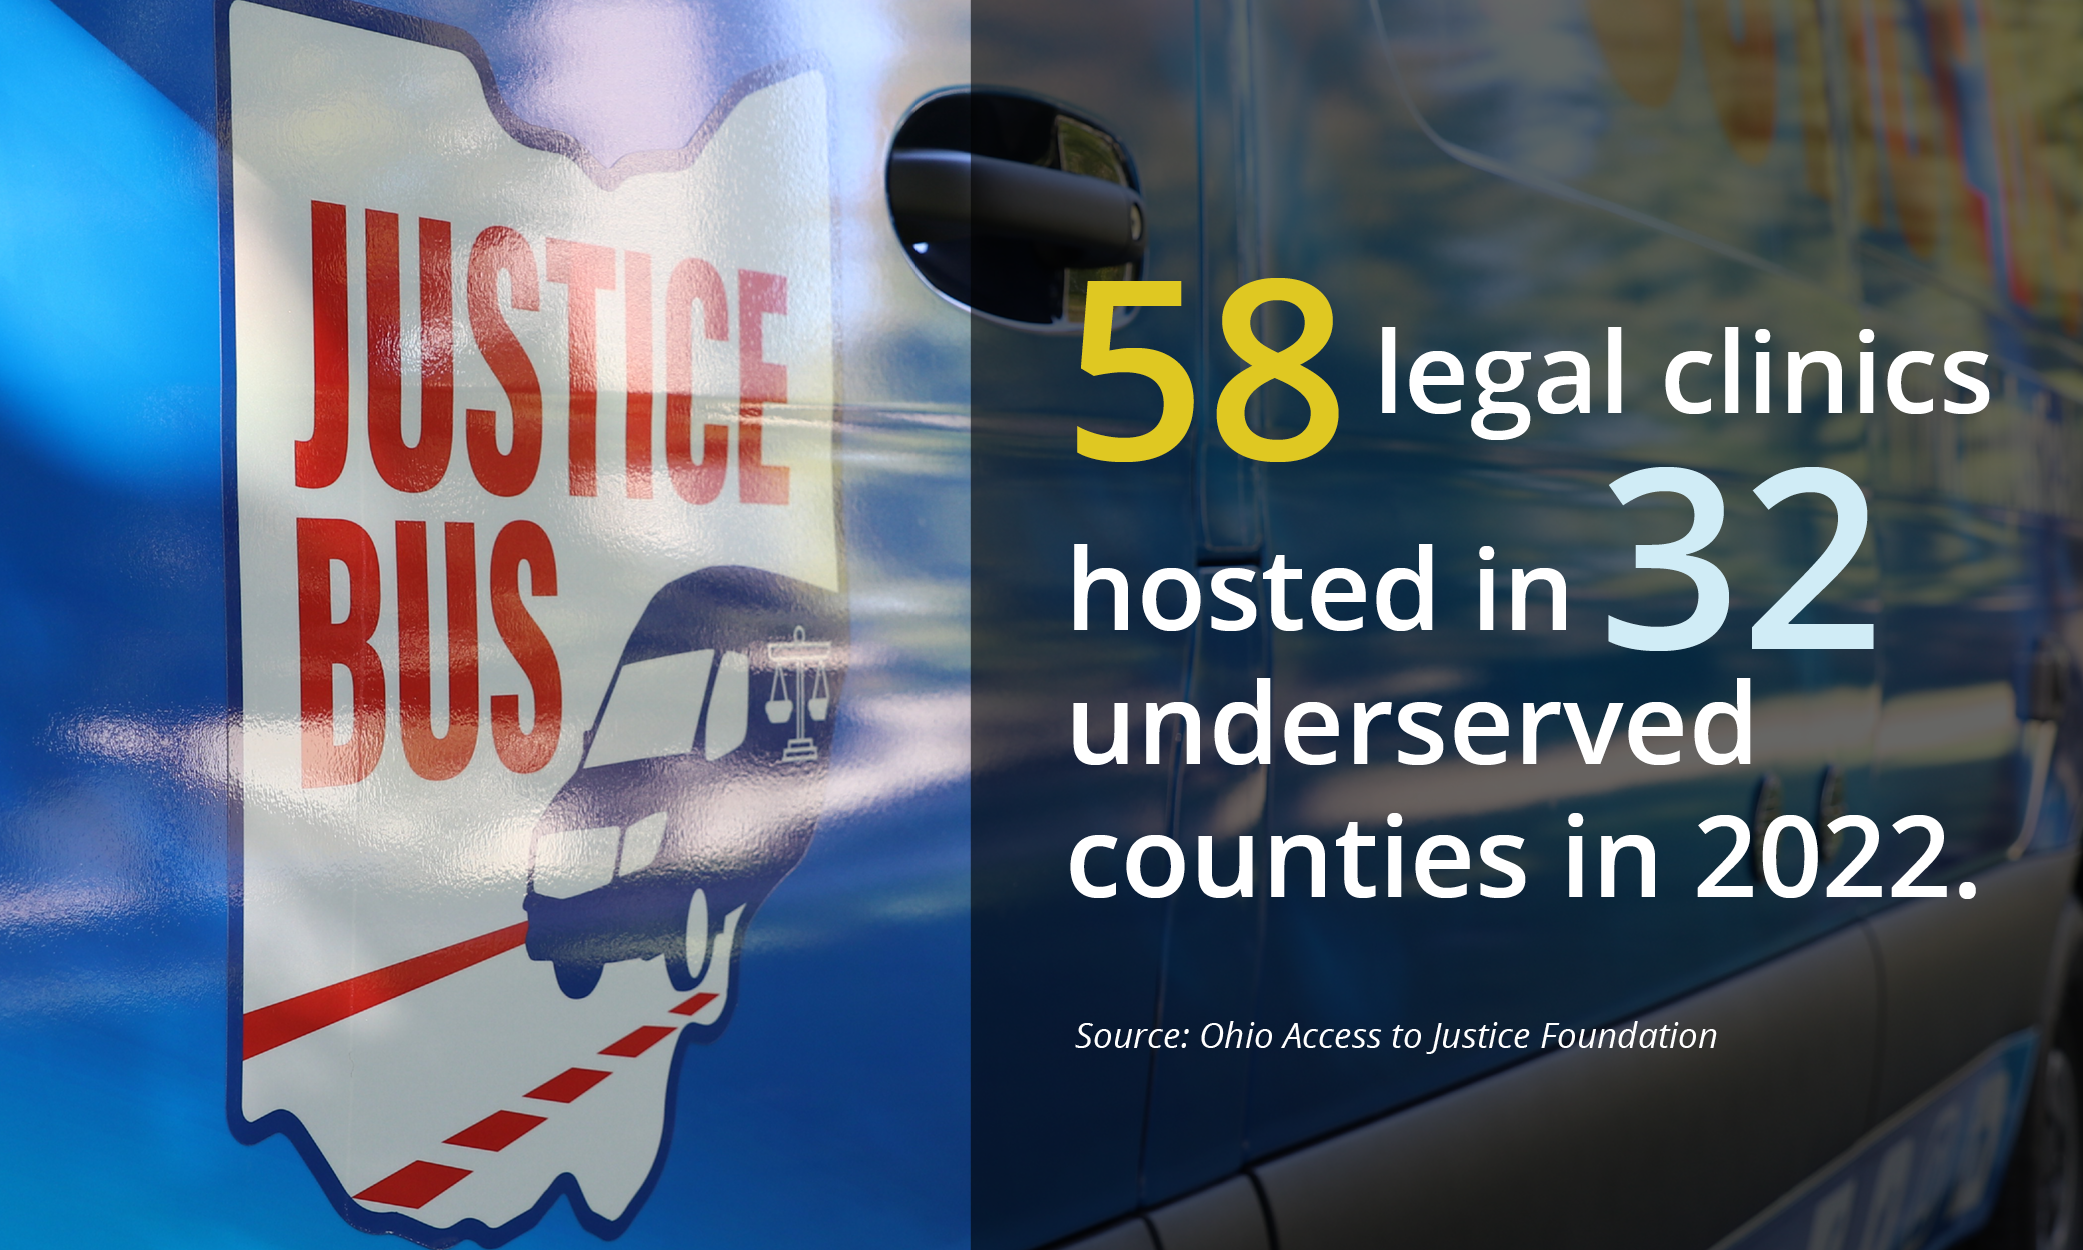 Infographic: 58 legal clinics hosted in 32 underserved counties in 2022 (Source: Ohio Access to Justice Foundation).